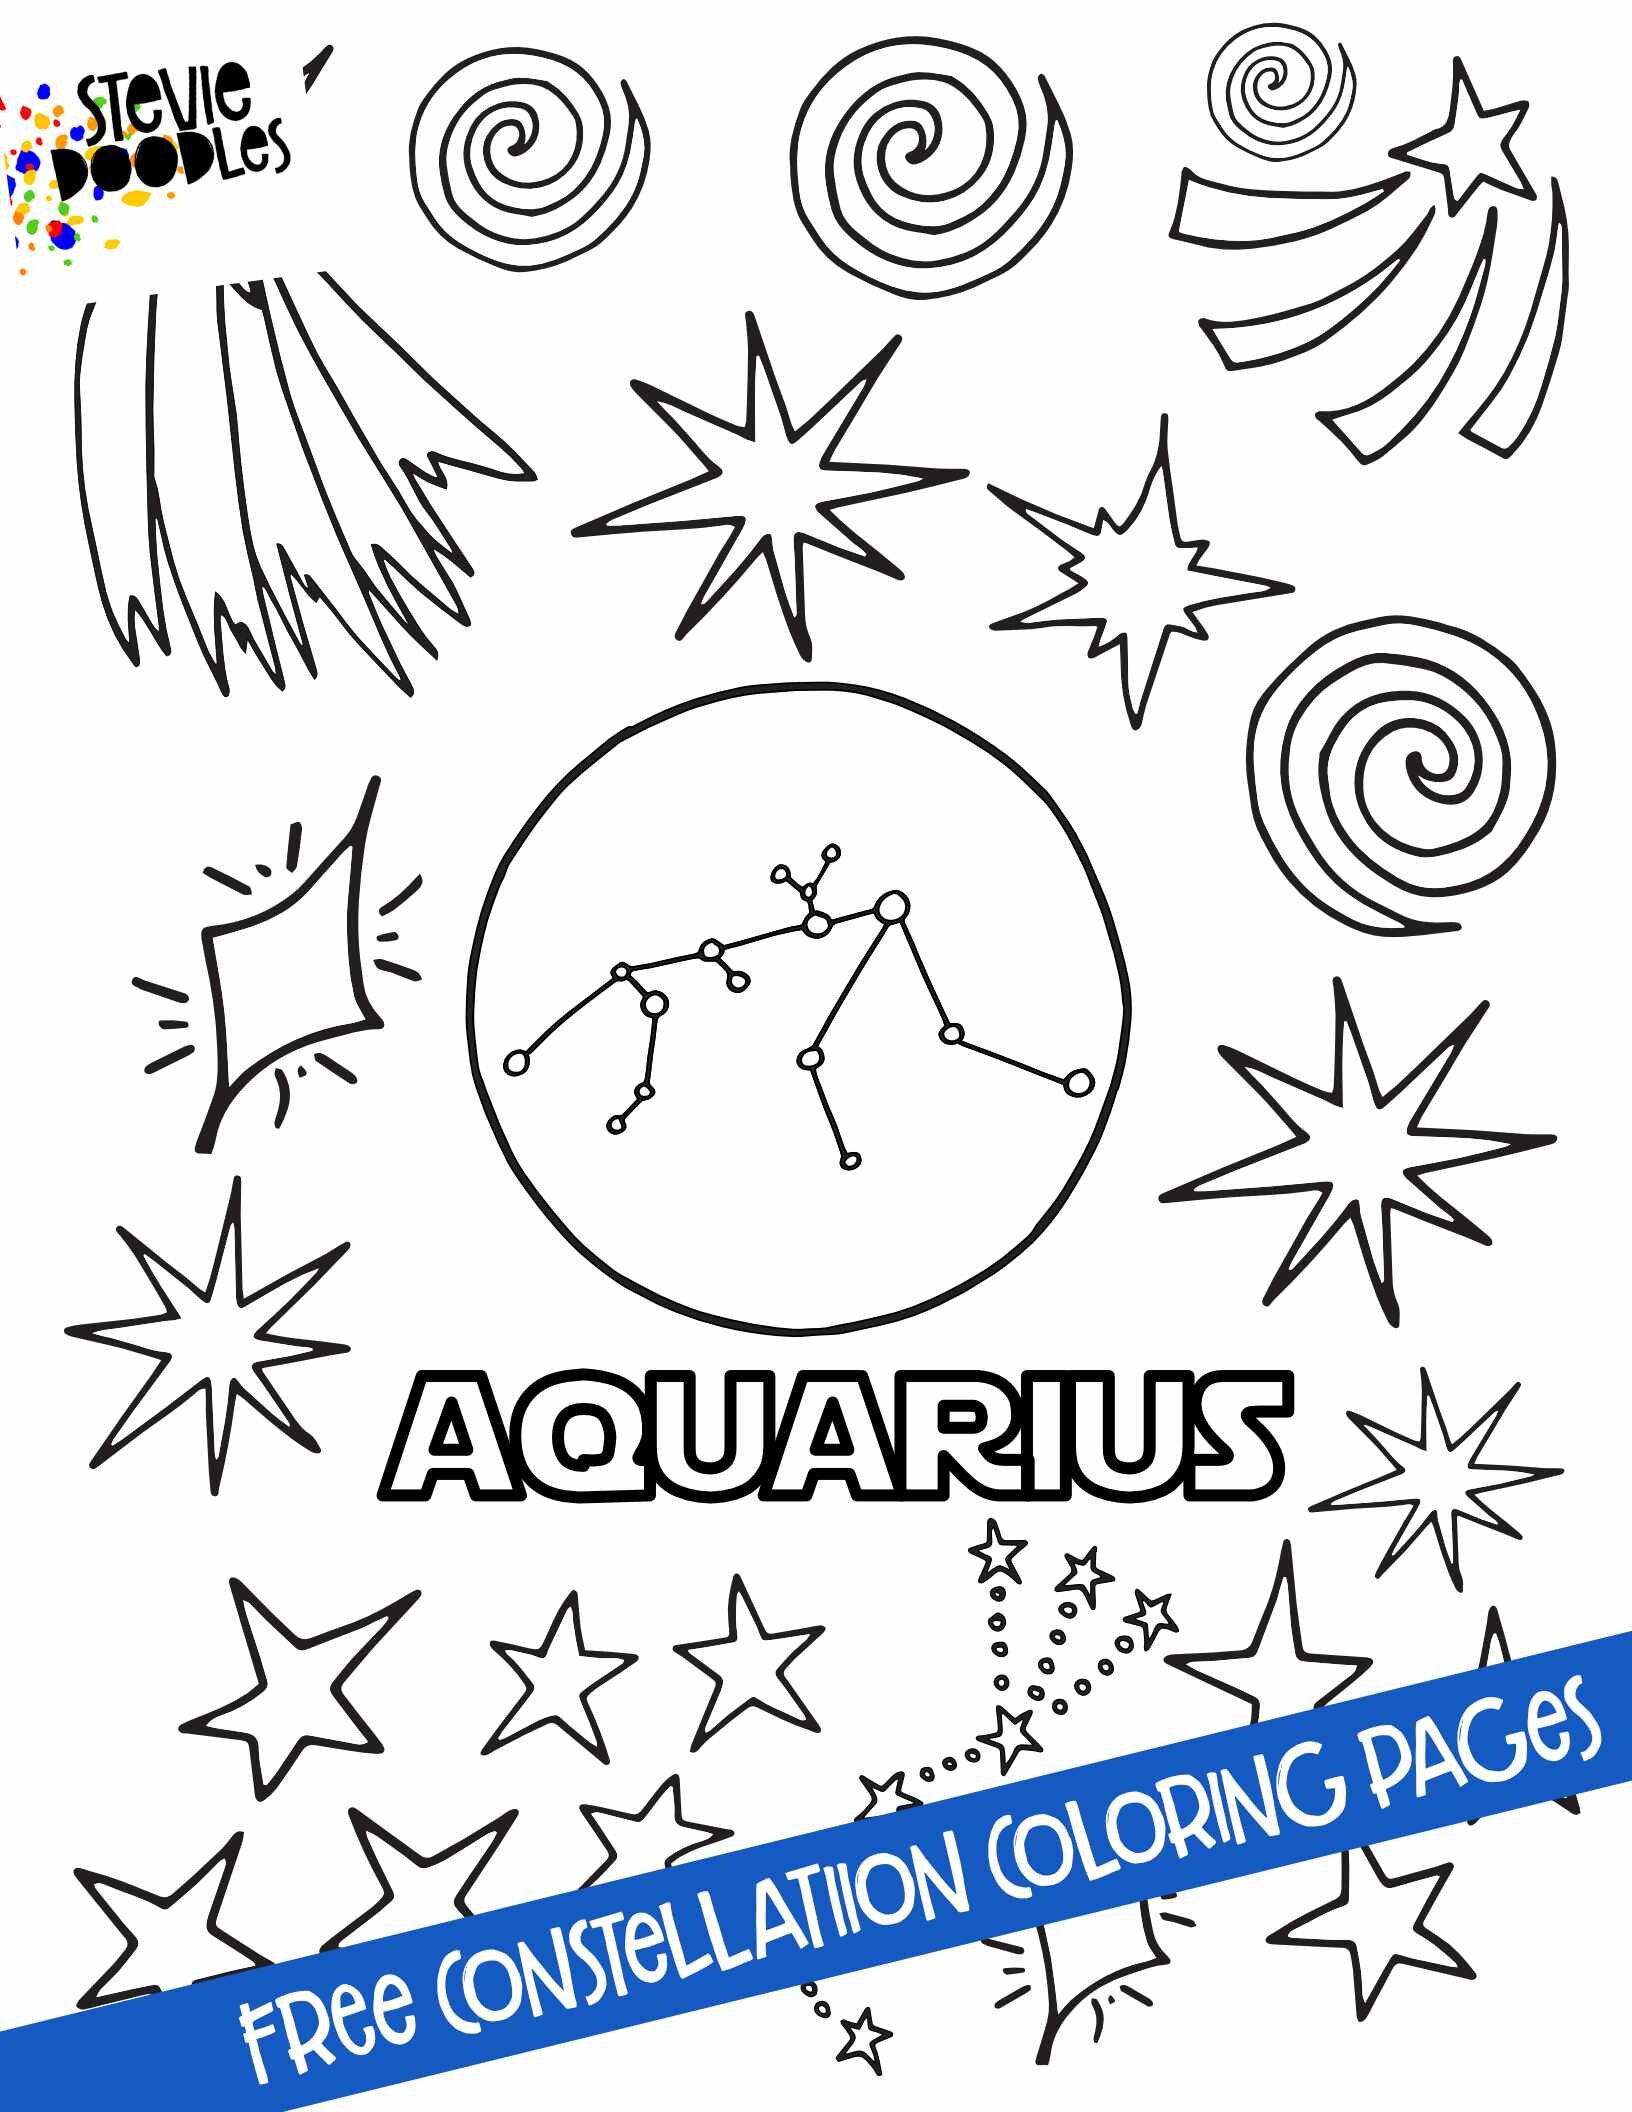 Constellations free constellation coloring pages â stevie doodles